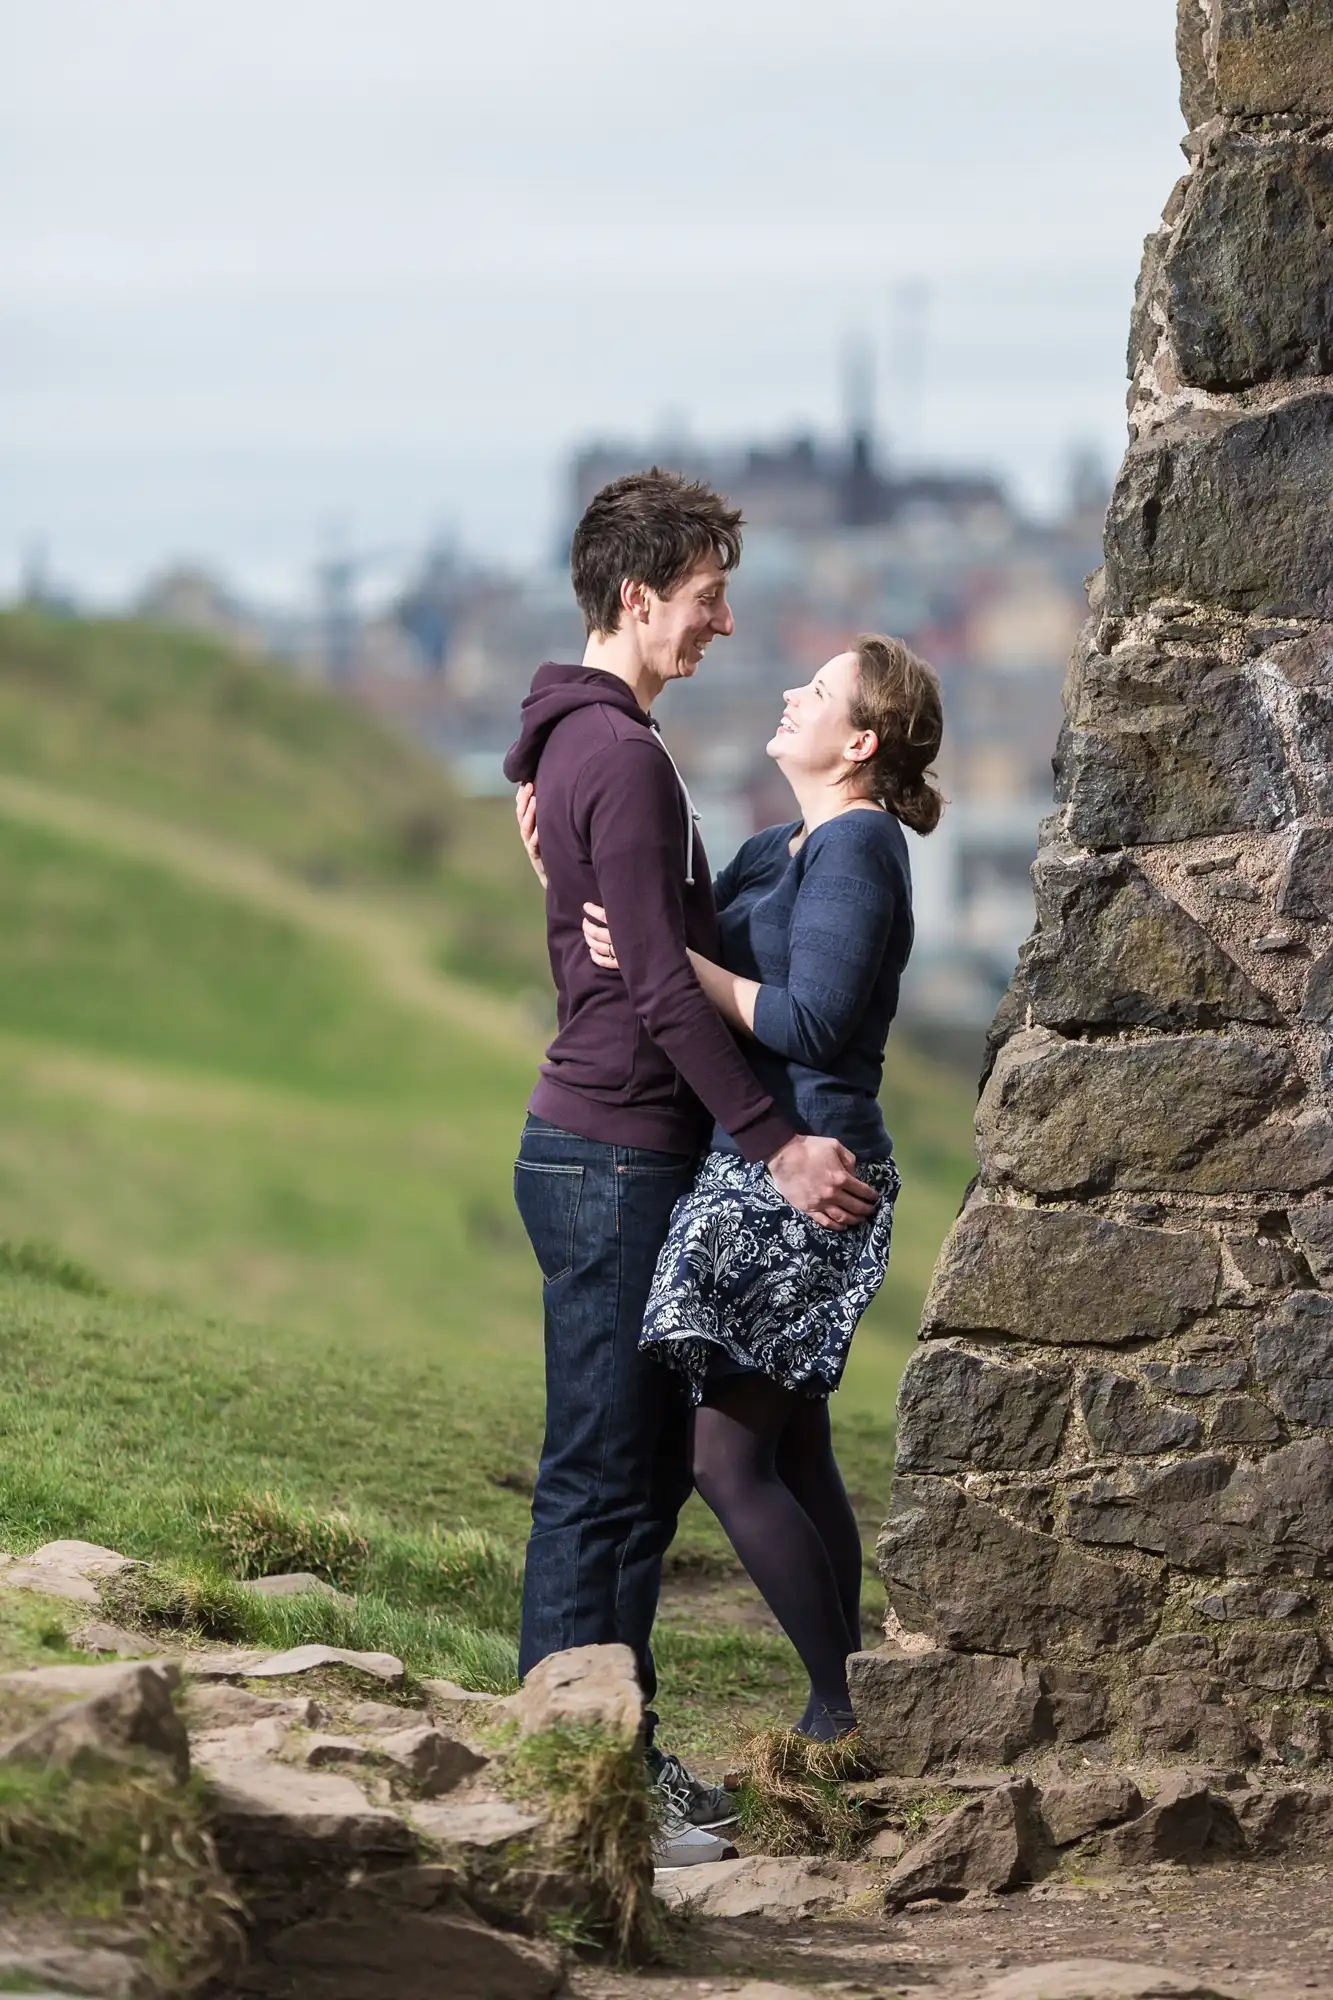 A couple embracing and smiling at each other next to a stone wall on a grassy hill, with a cityscape in the distant background.